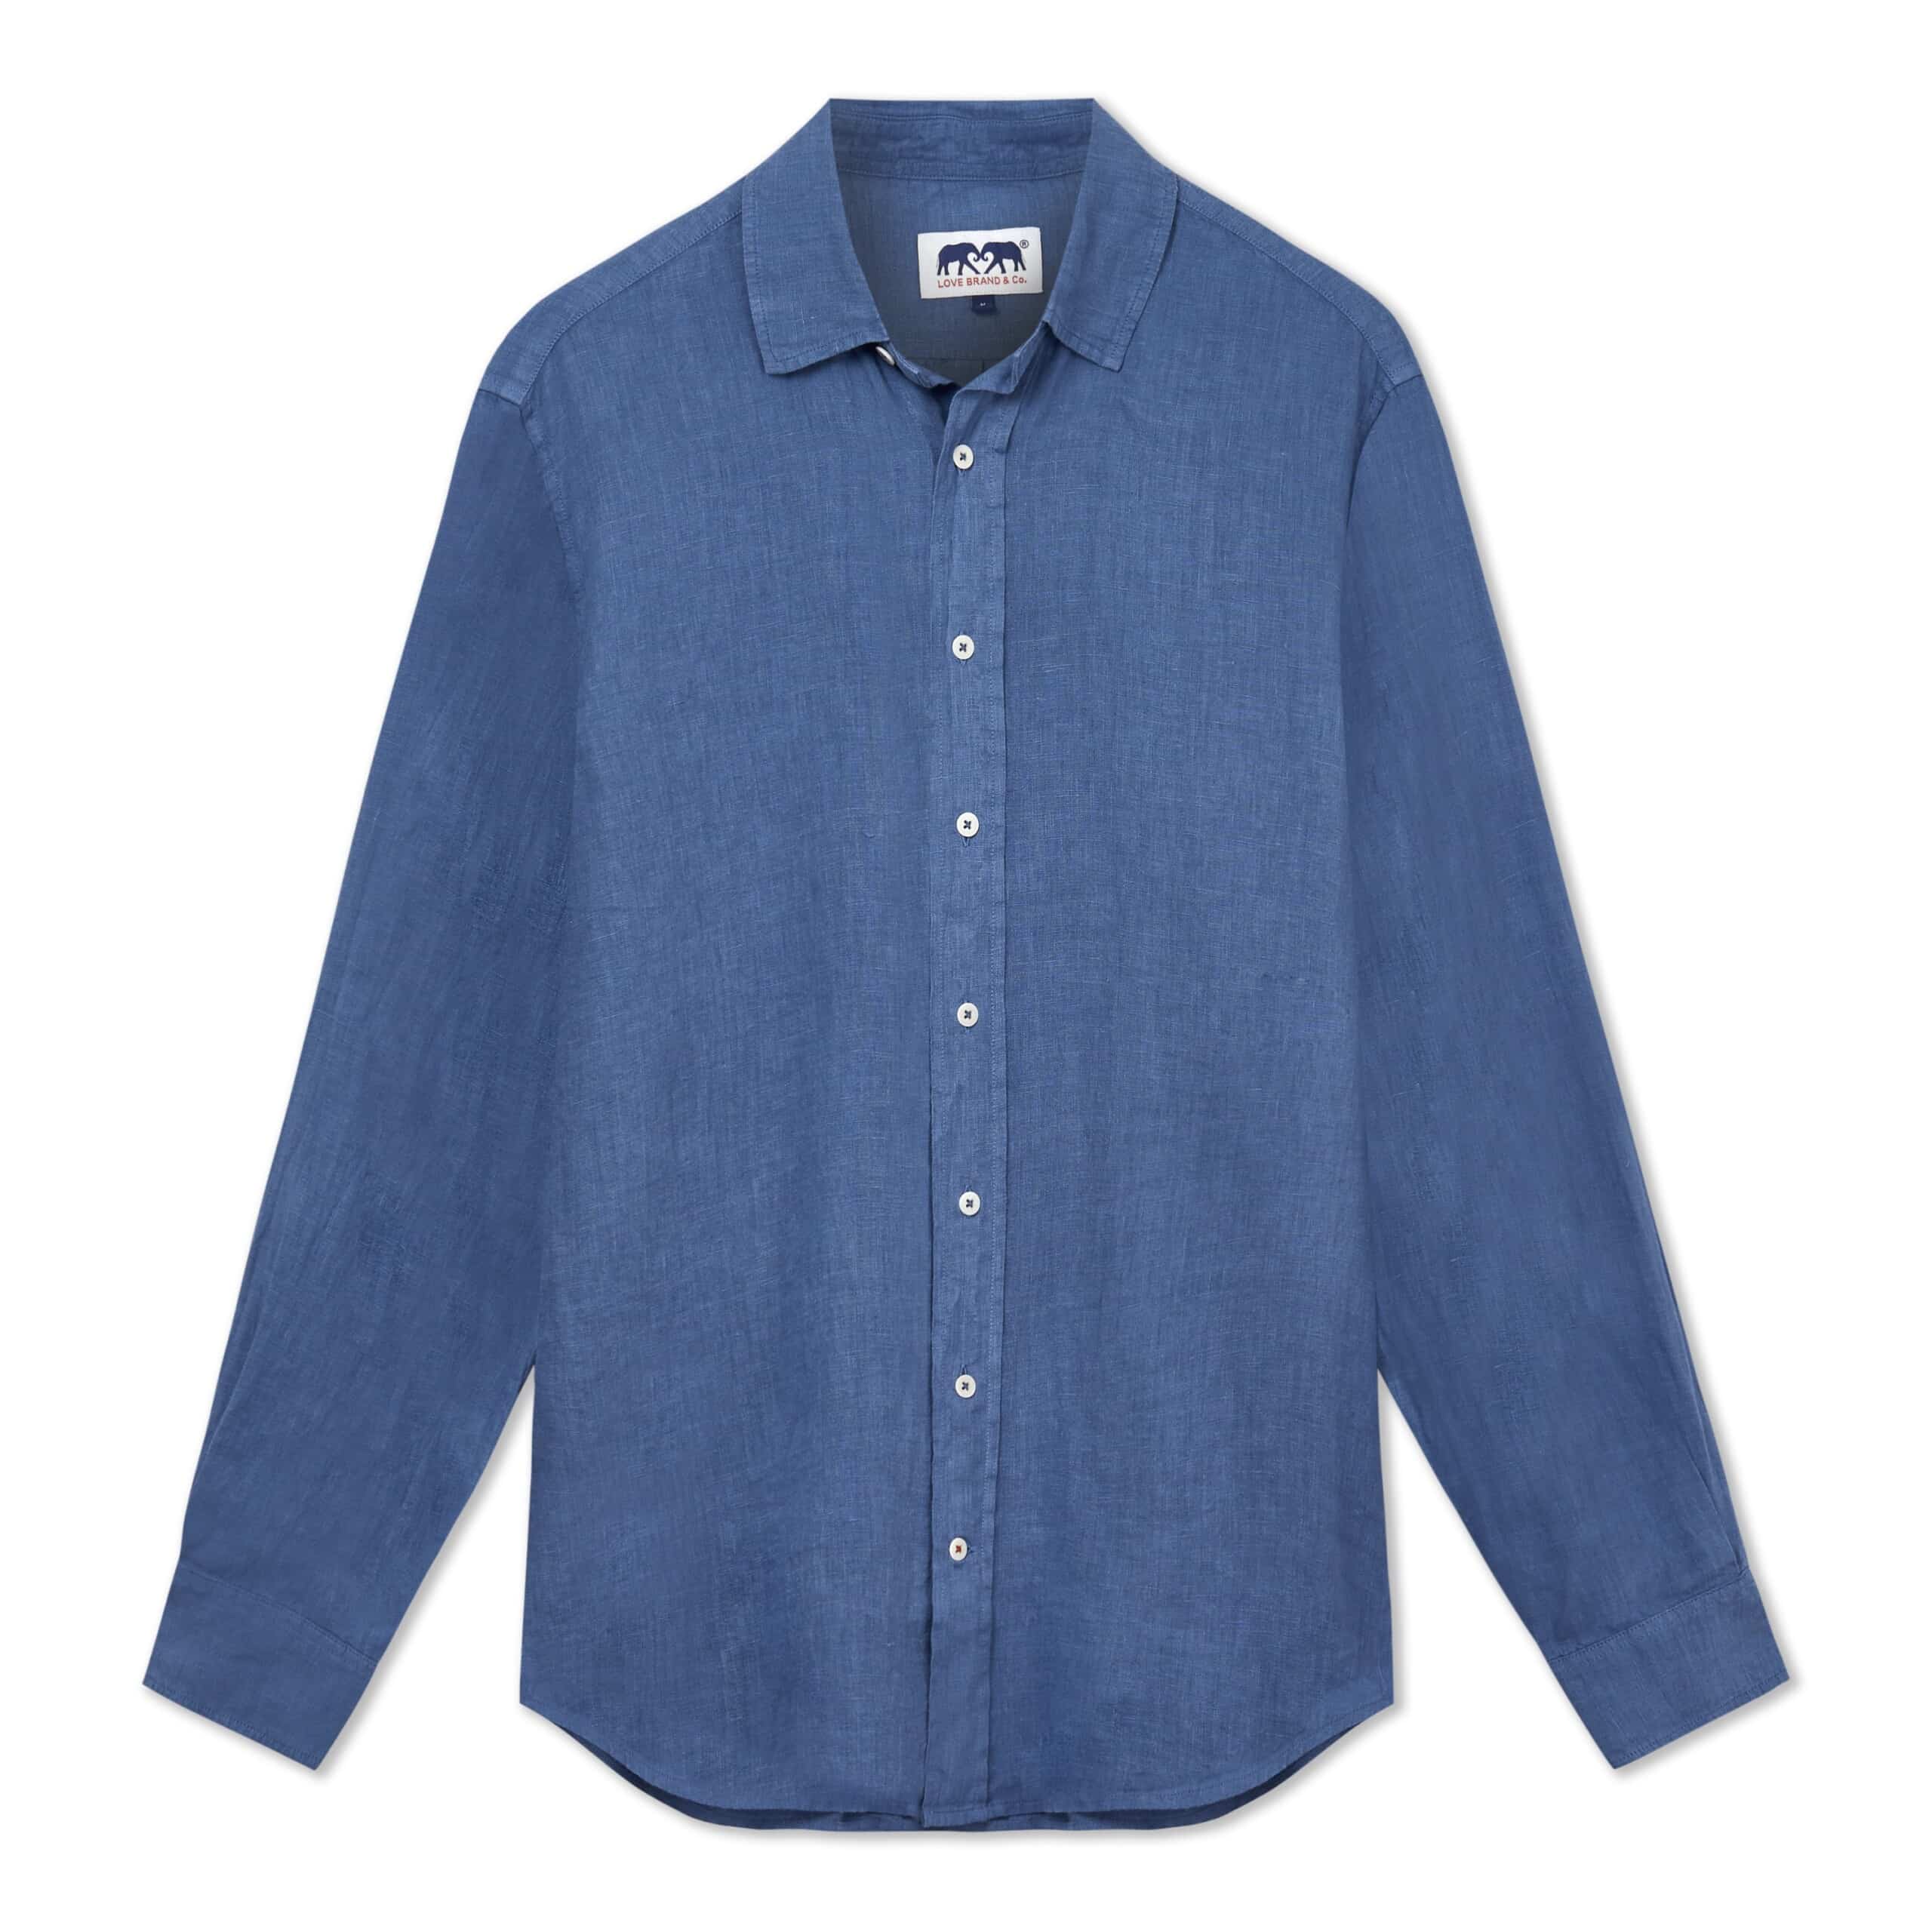 Abaco Linen Shirt - Deep Blue - Out and About